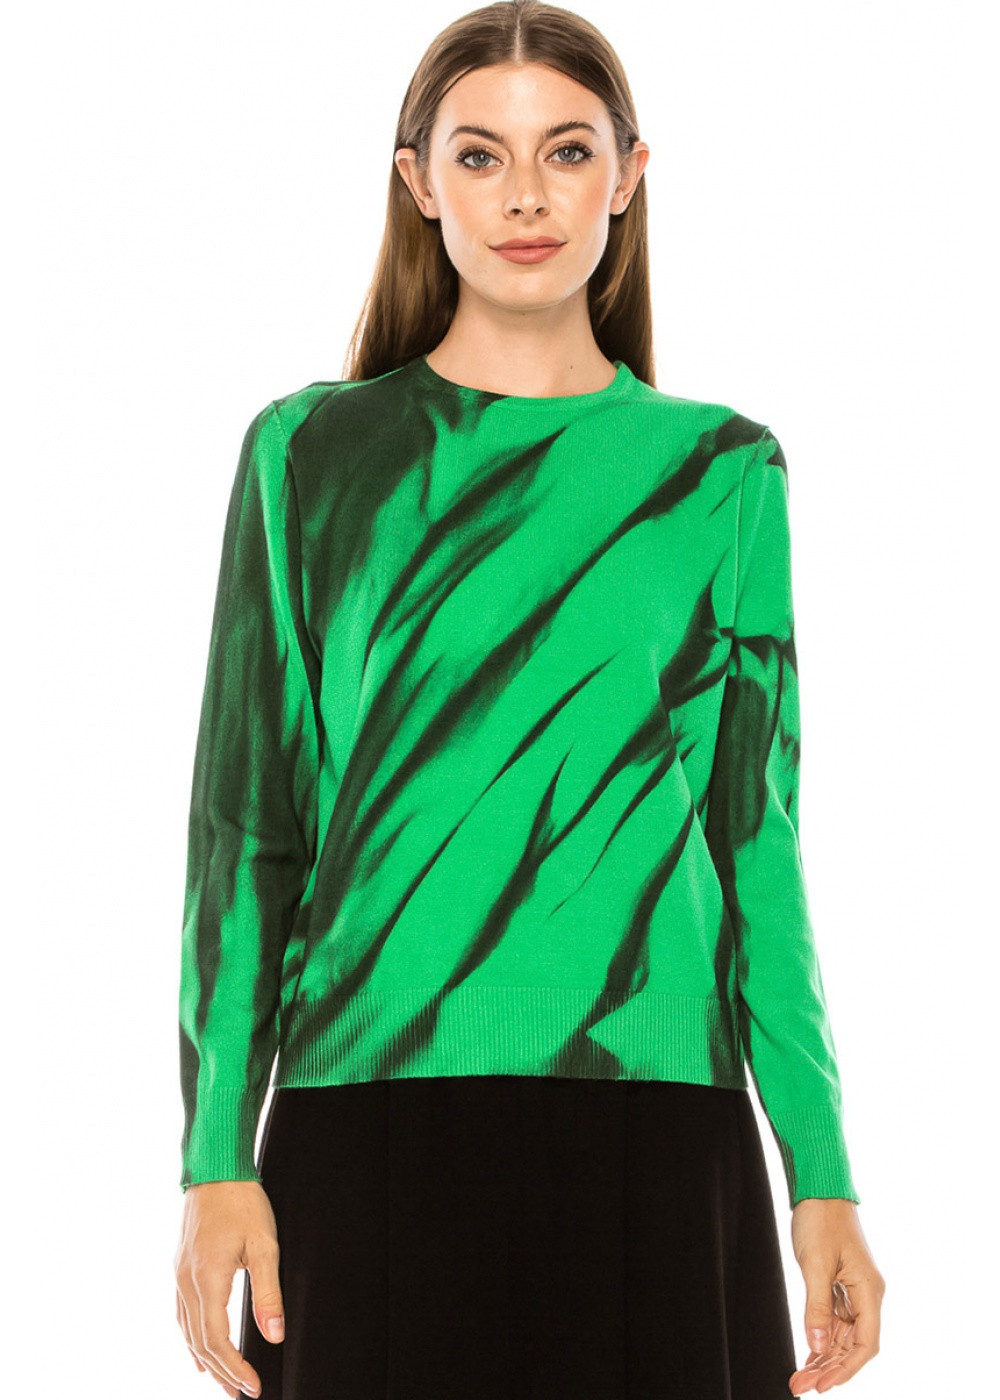 The vibrant green sweater with black splashes